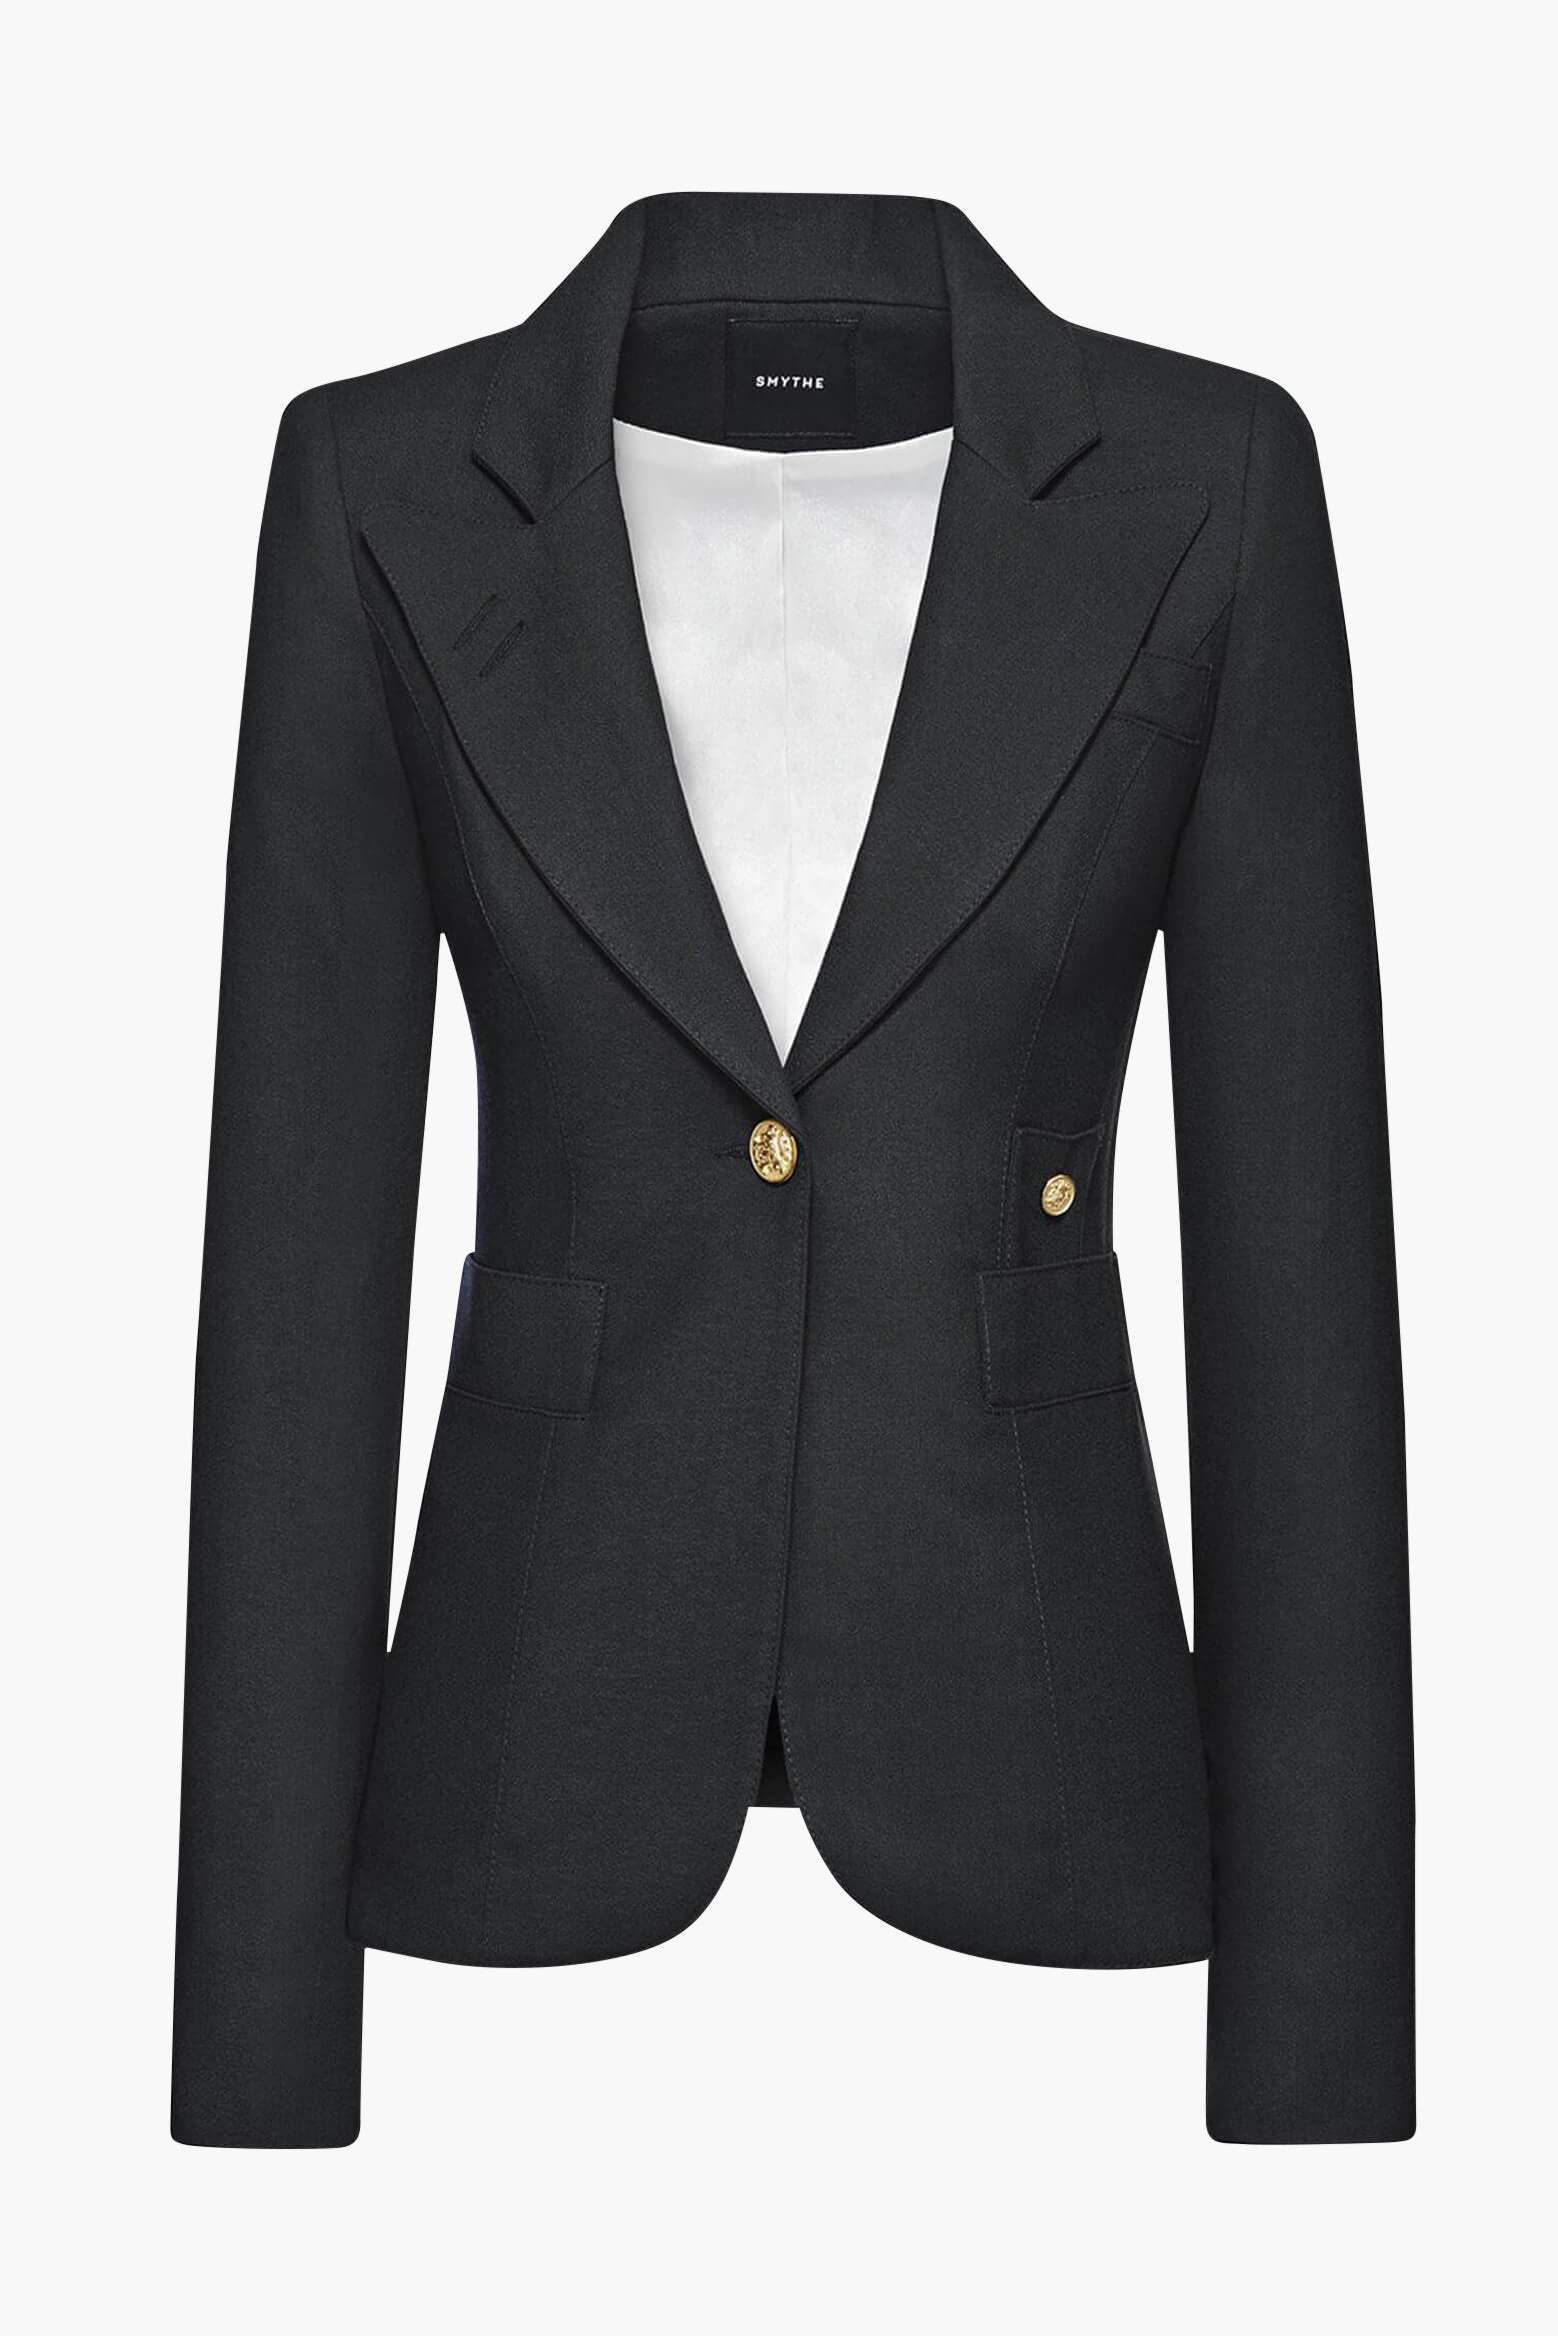 Smythe Classic Duchess Blazer in Black available The New Trend